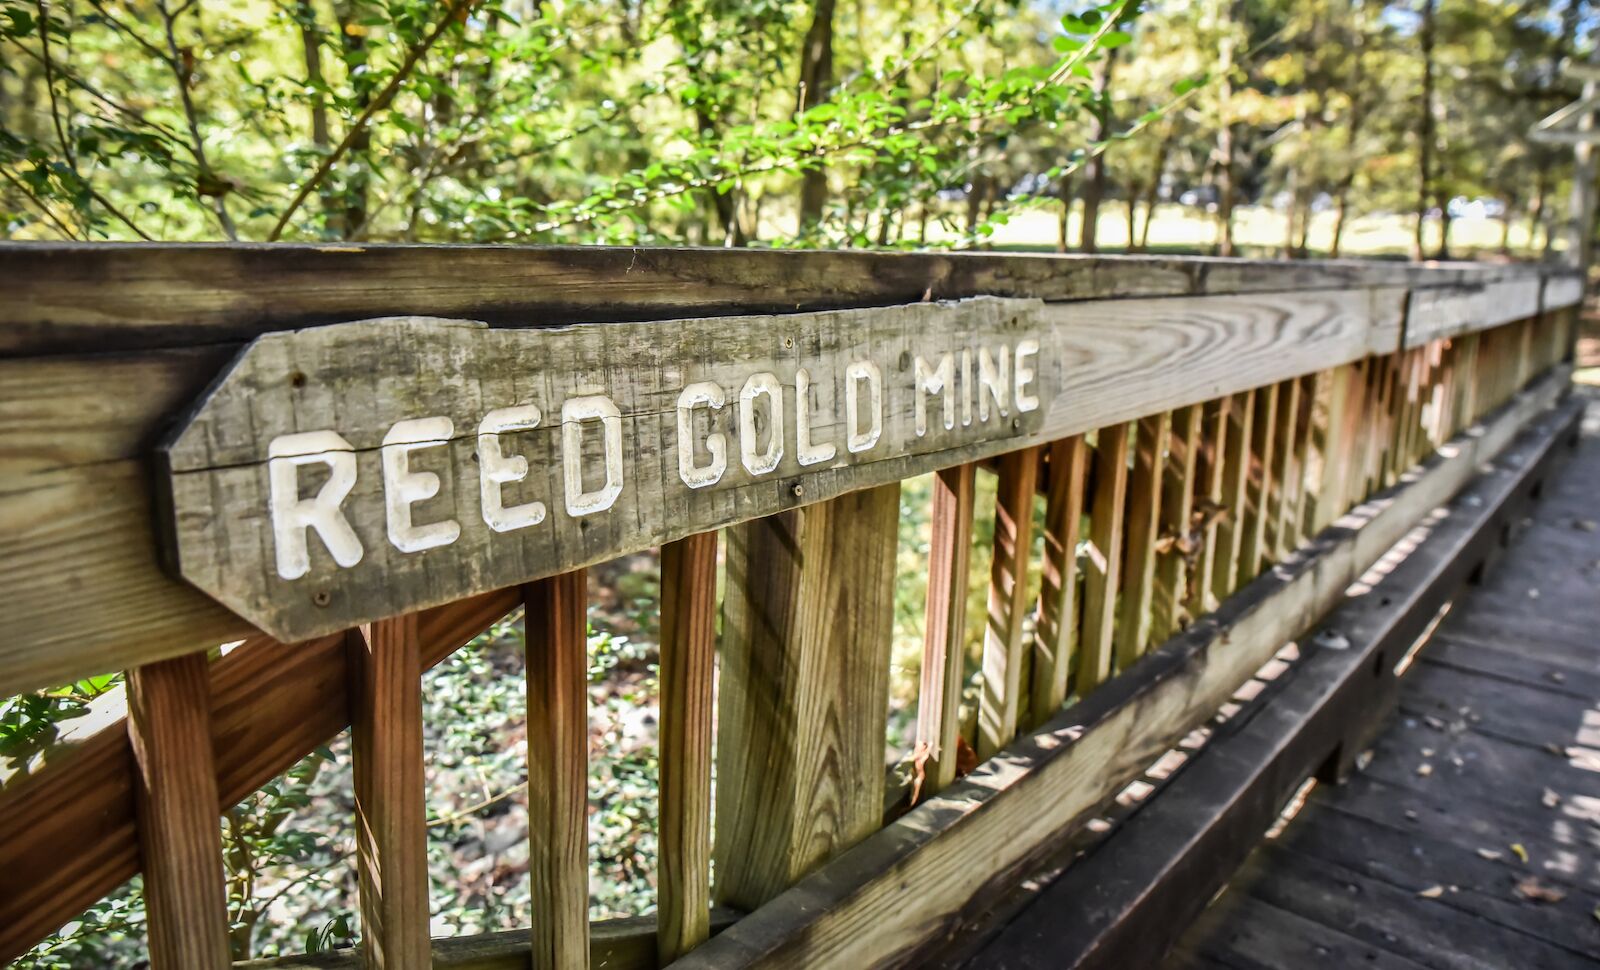 reed gold mine cabarrus county